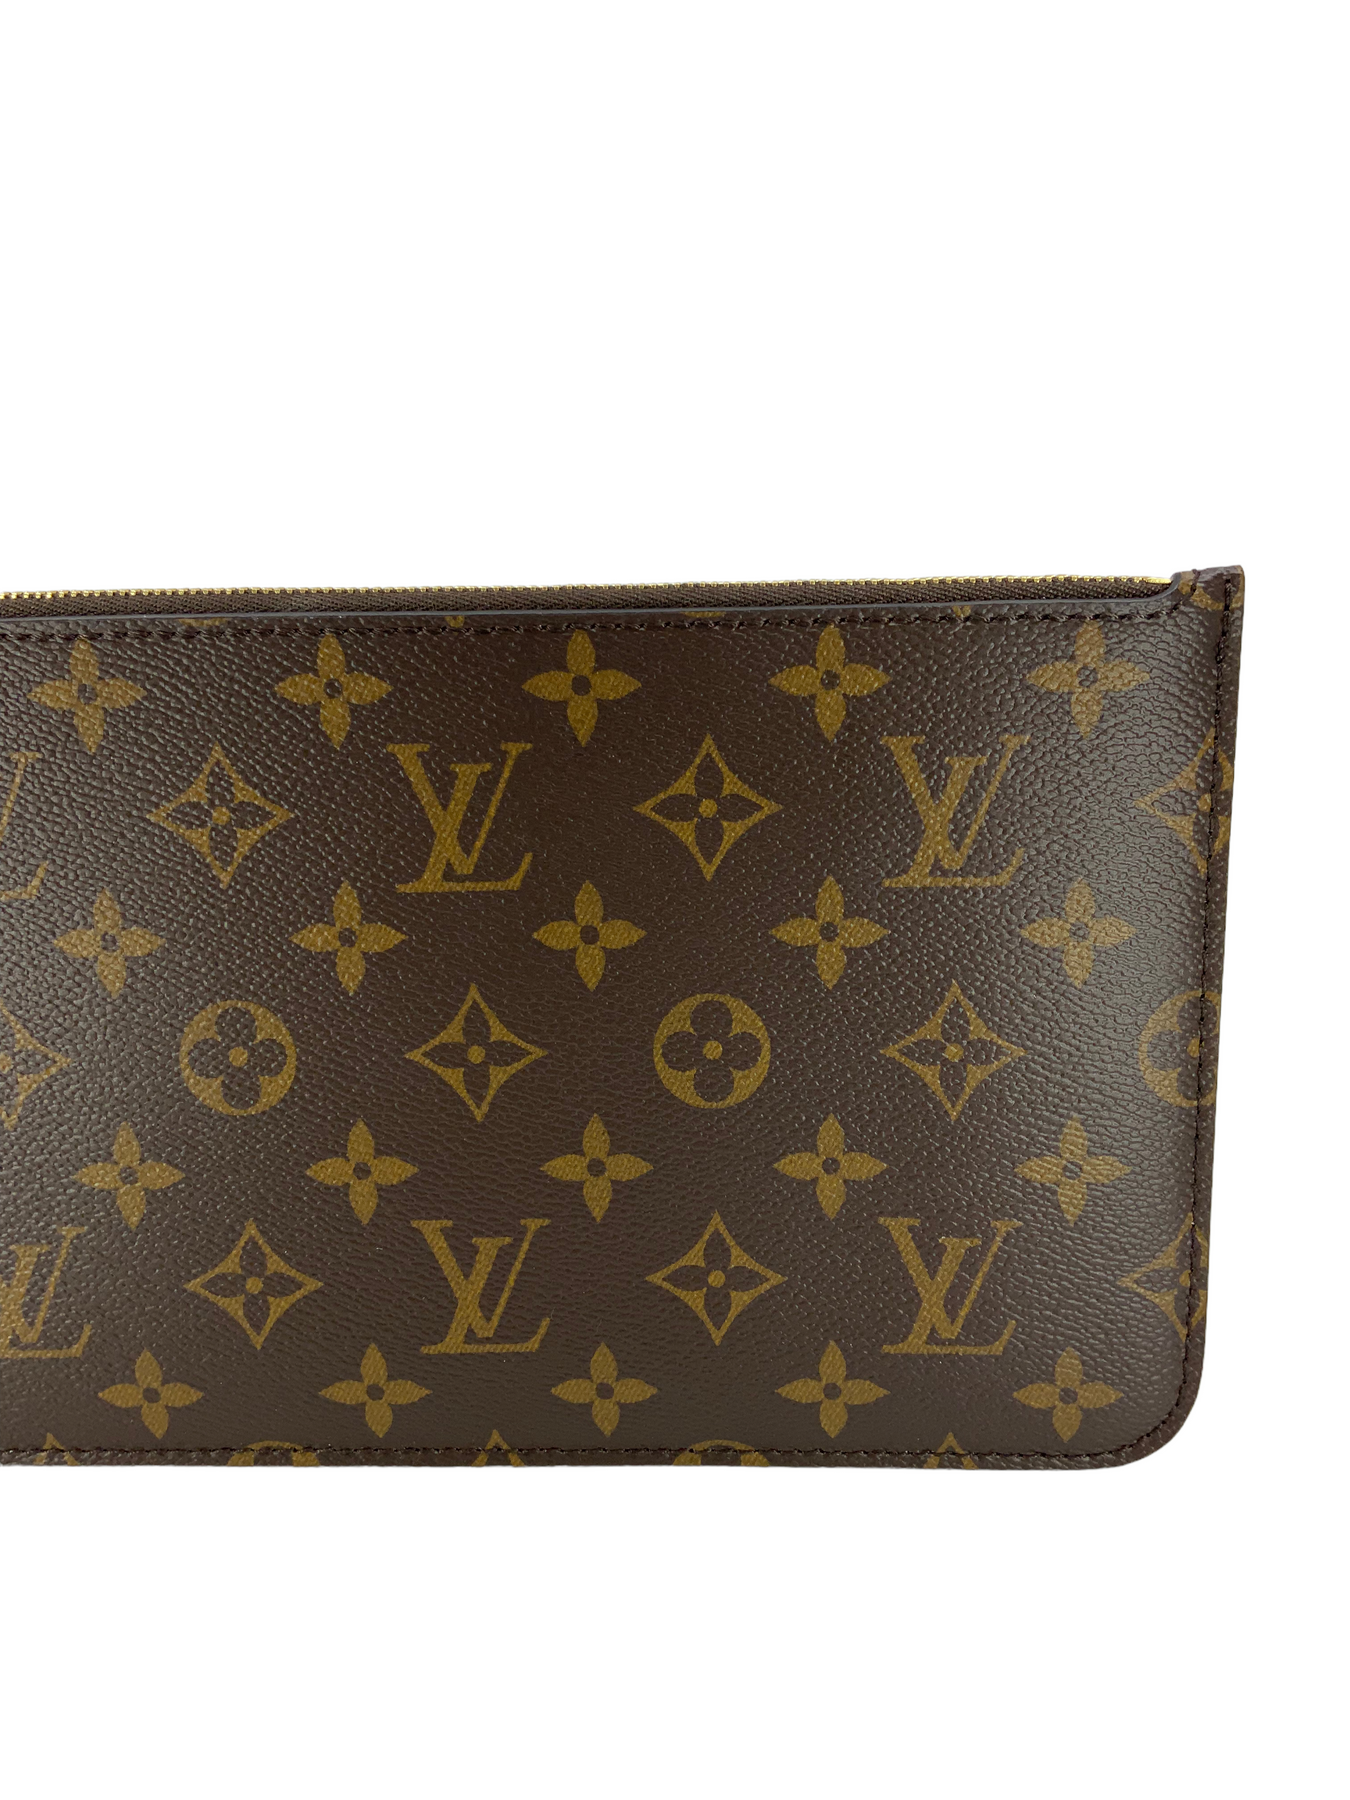 Louis Vuitton Monogram Teddy Neverfull MM Tote bag with Pouch 283lvs512